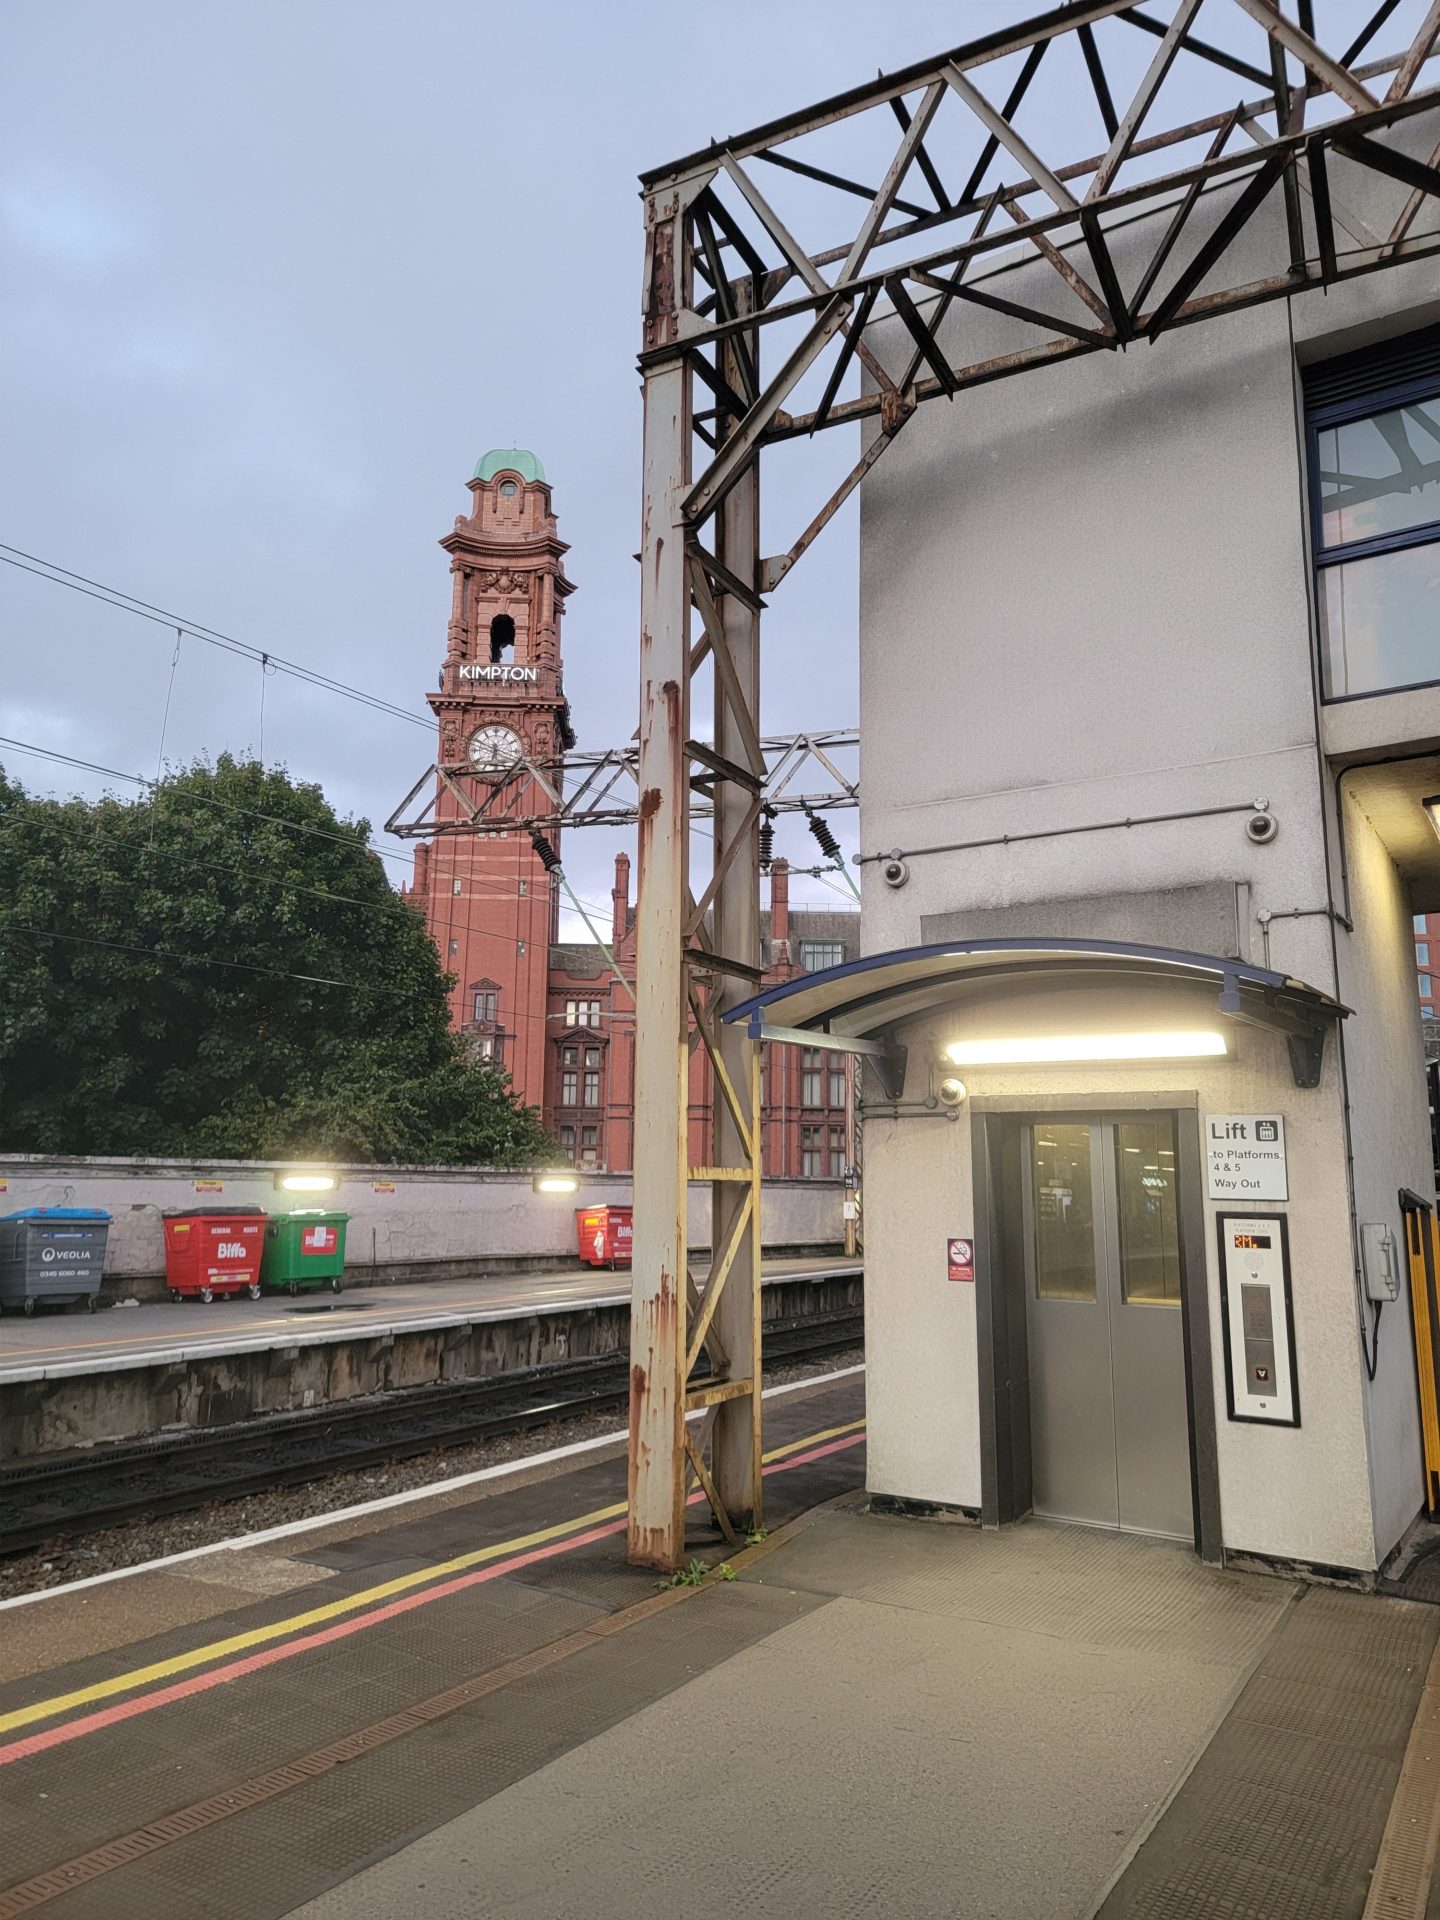 a train station with a clock tower in the background